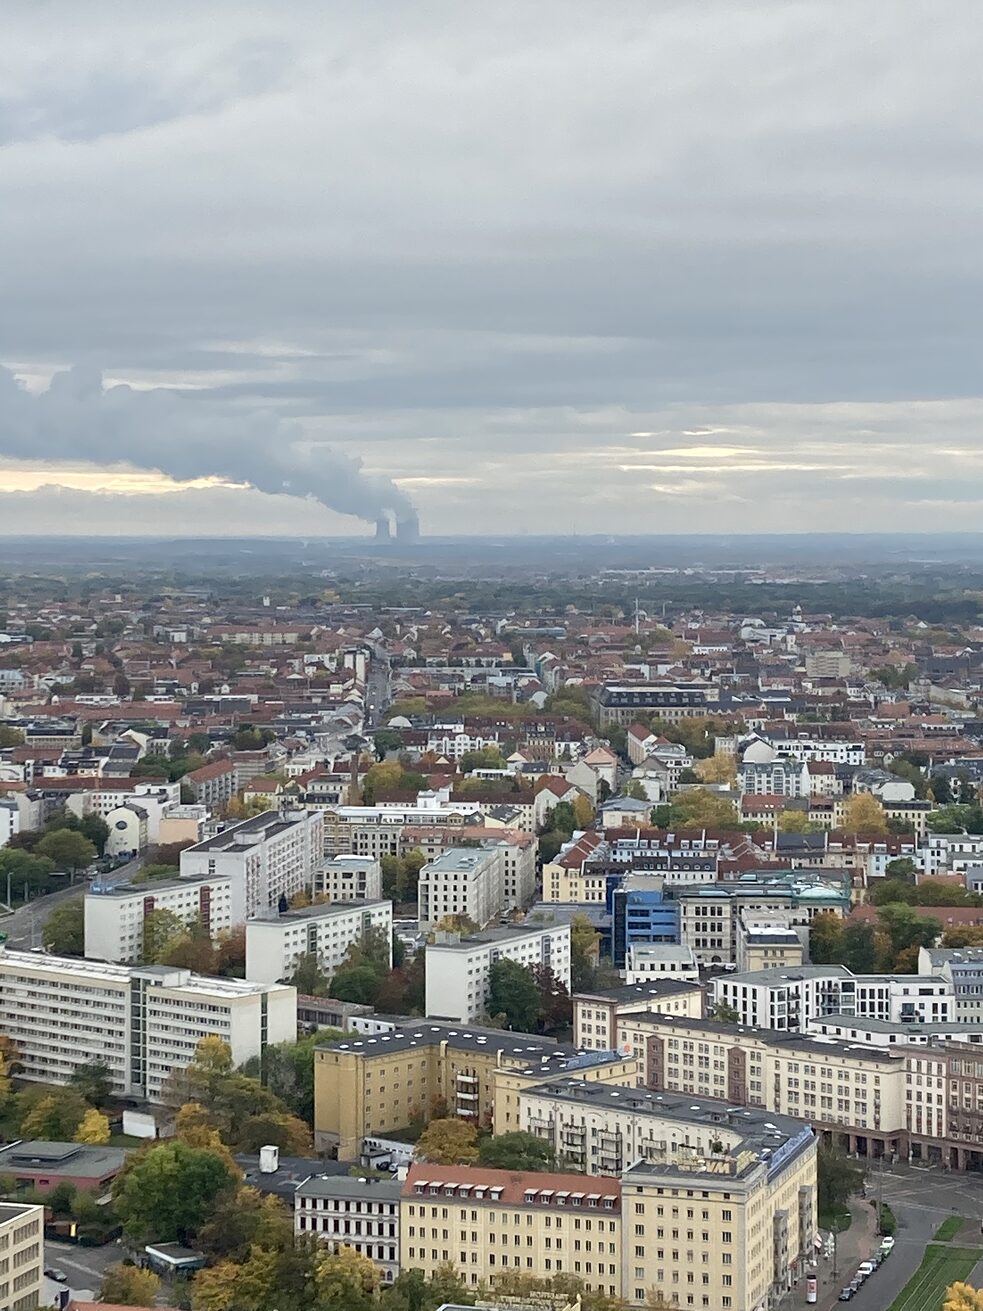 Leipzig viewed from its tallest building